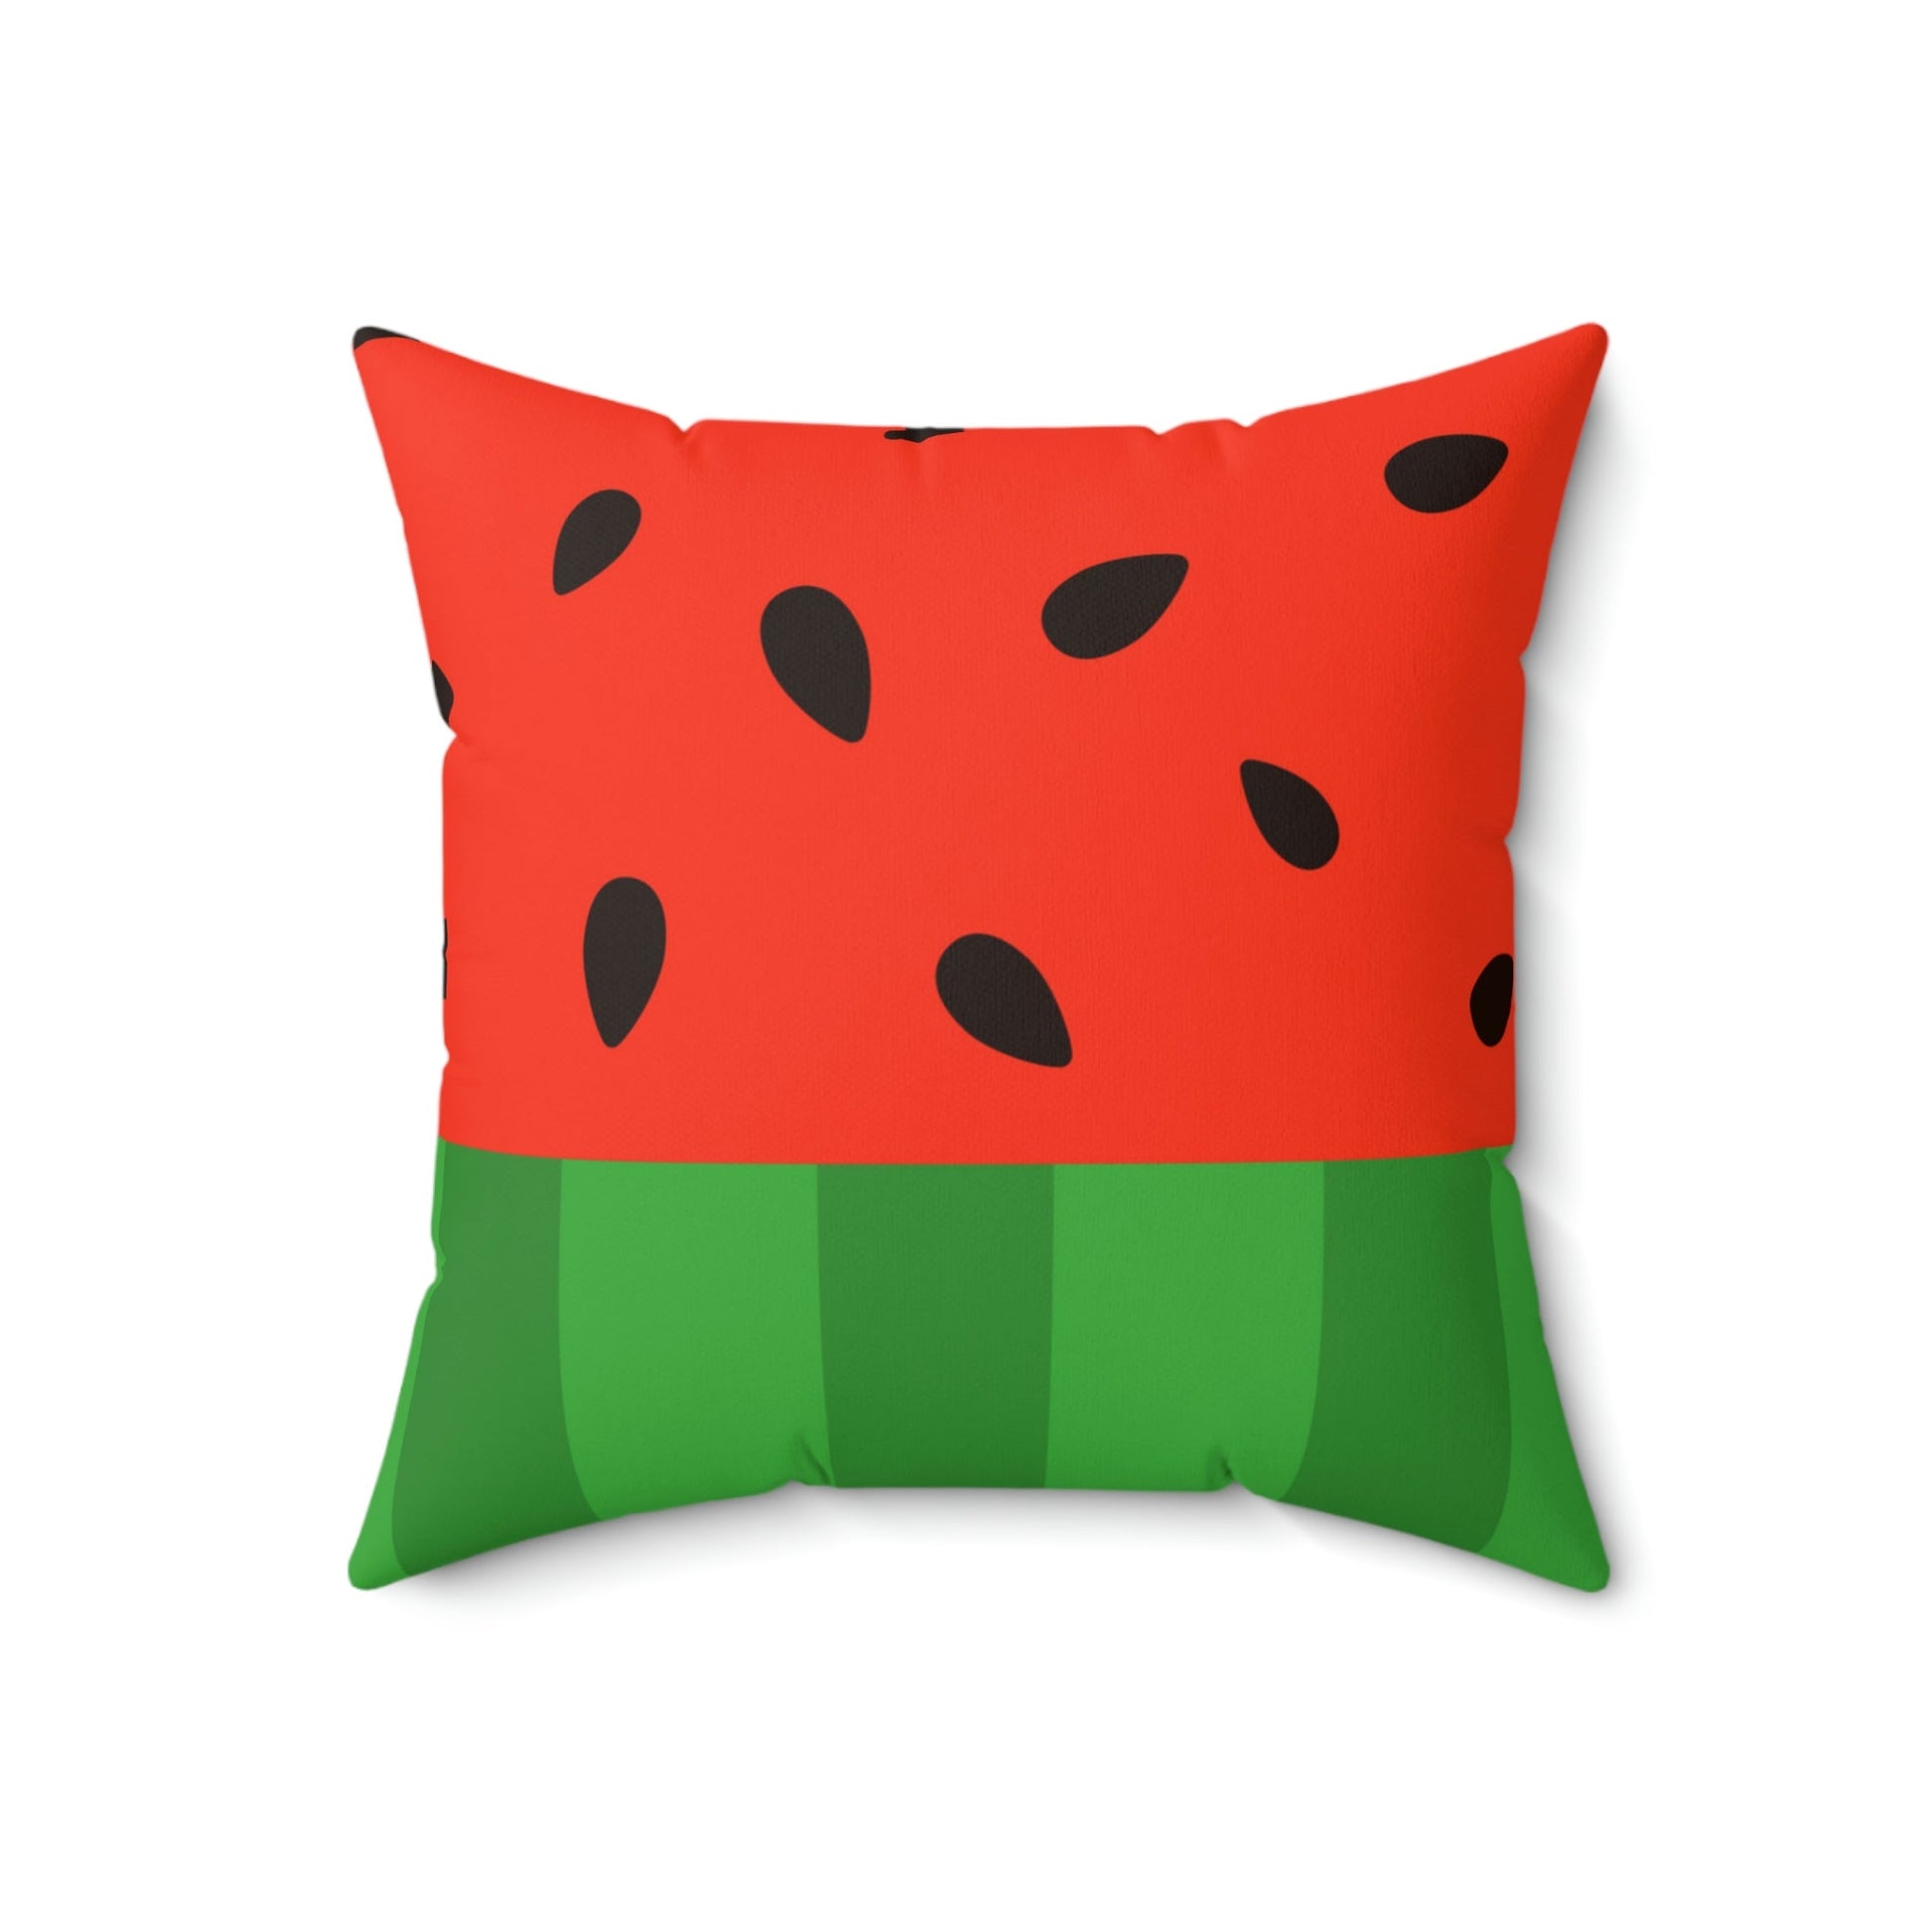 Slice of Watermelon Square Pillow Home Decor Pink Sweetheart